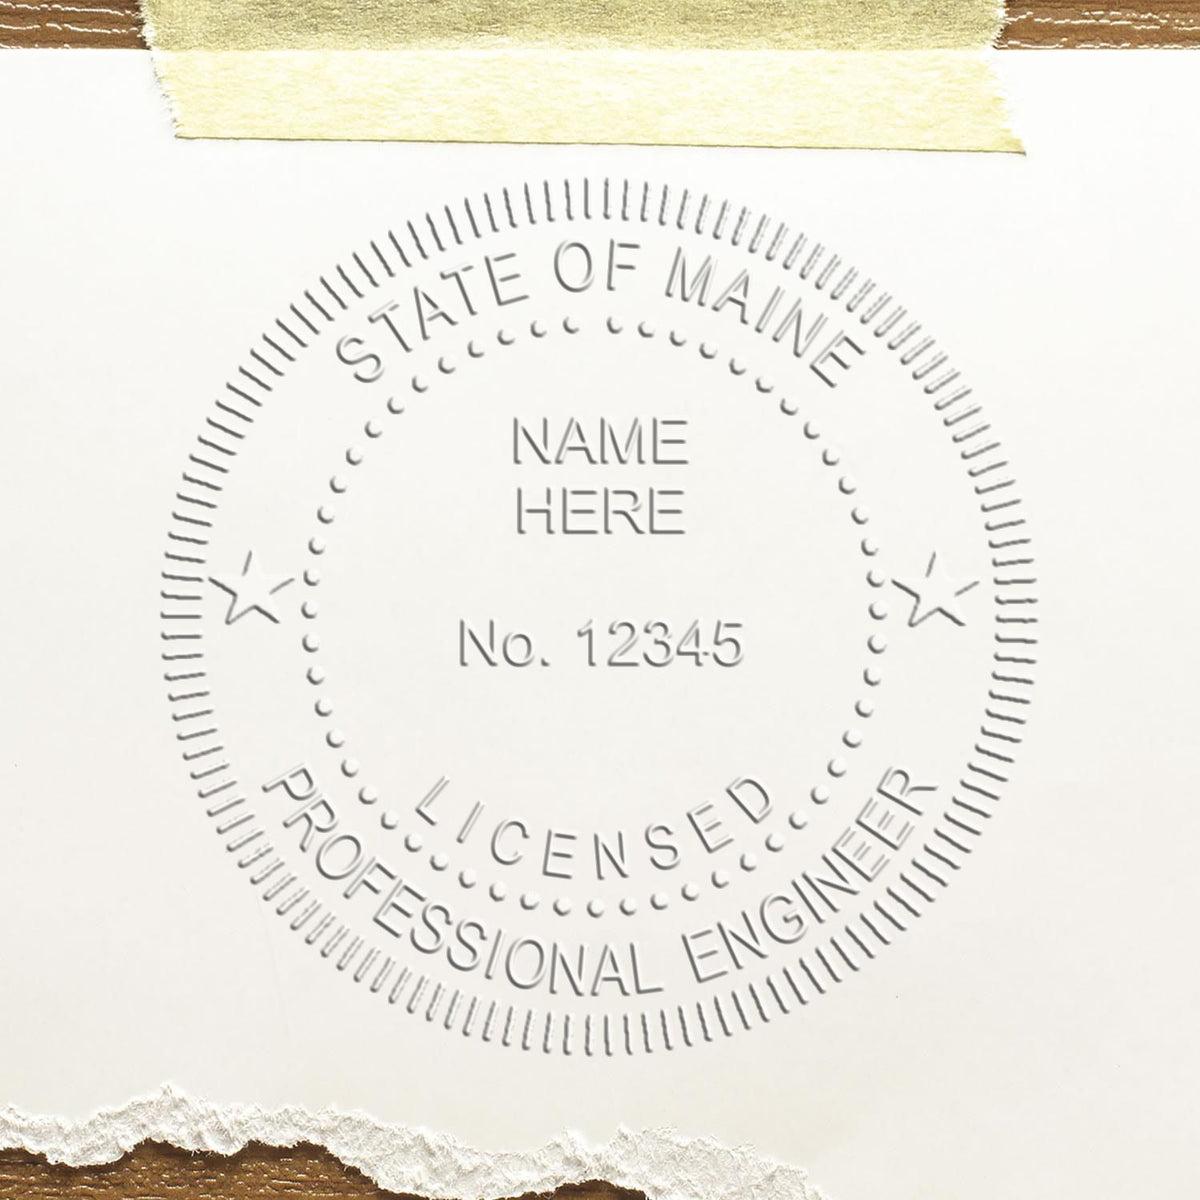 A photograph of the Hybrid Maine Engineer Seal stamp impression reveals a vivid, professional image of the on paper.